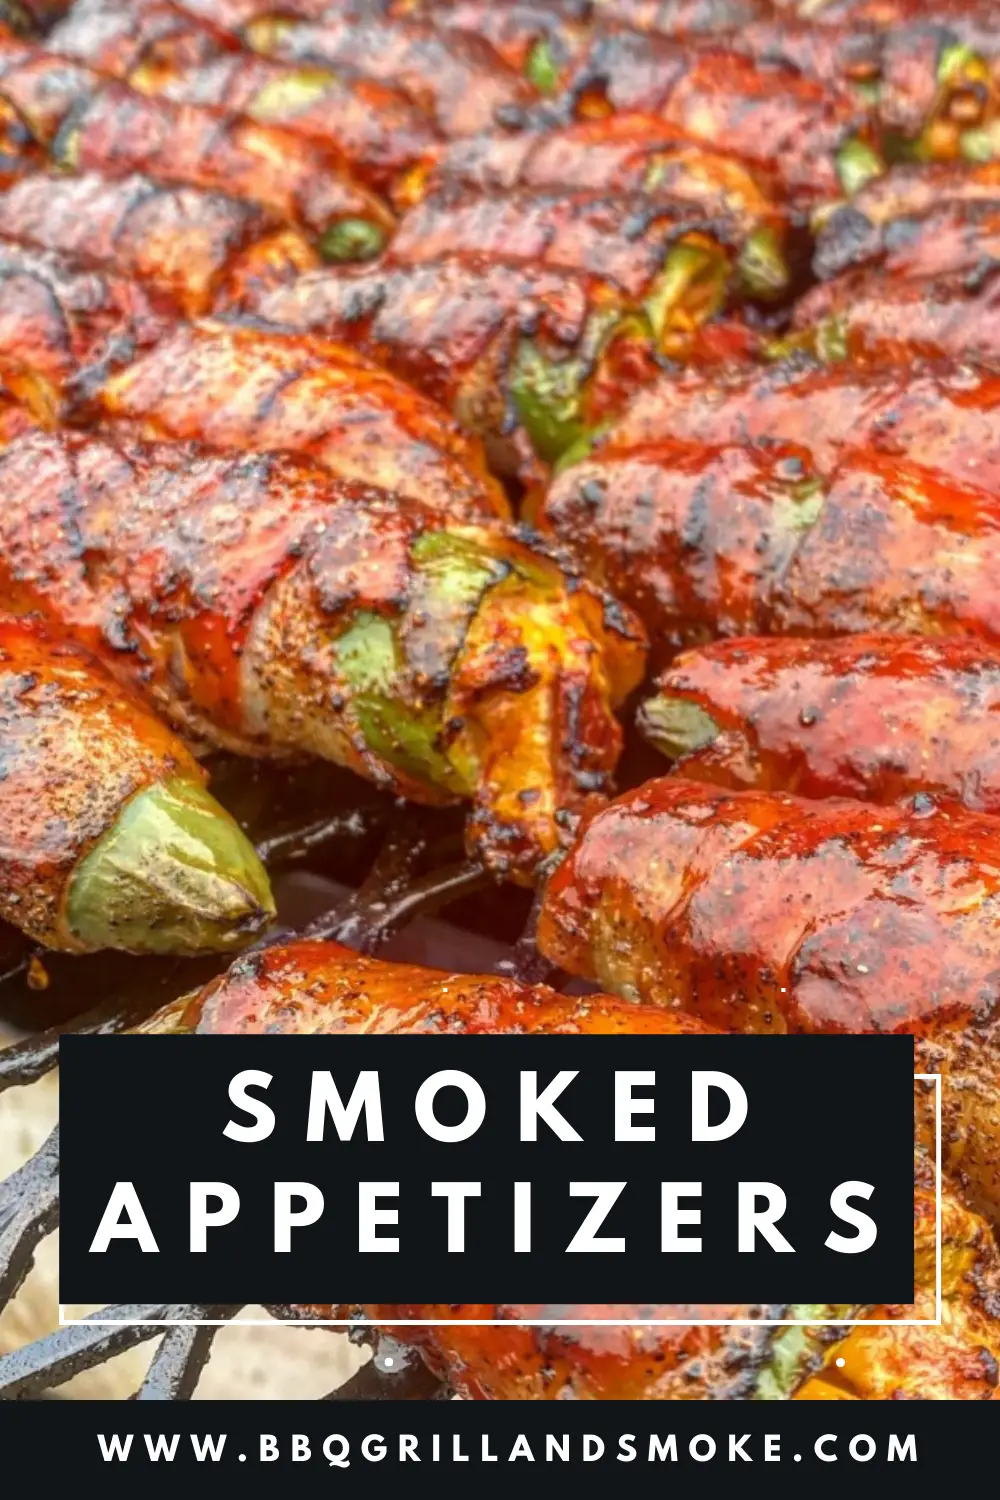 Smoked Appetizers